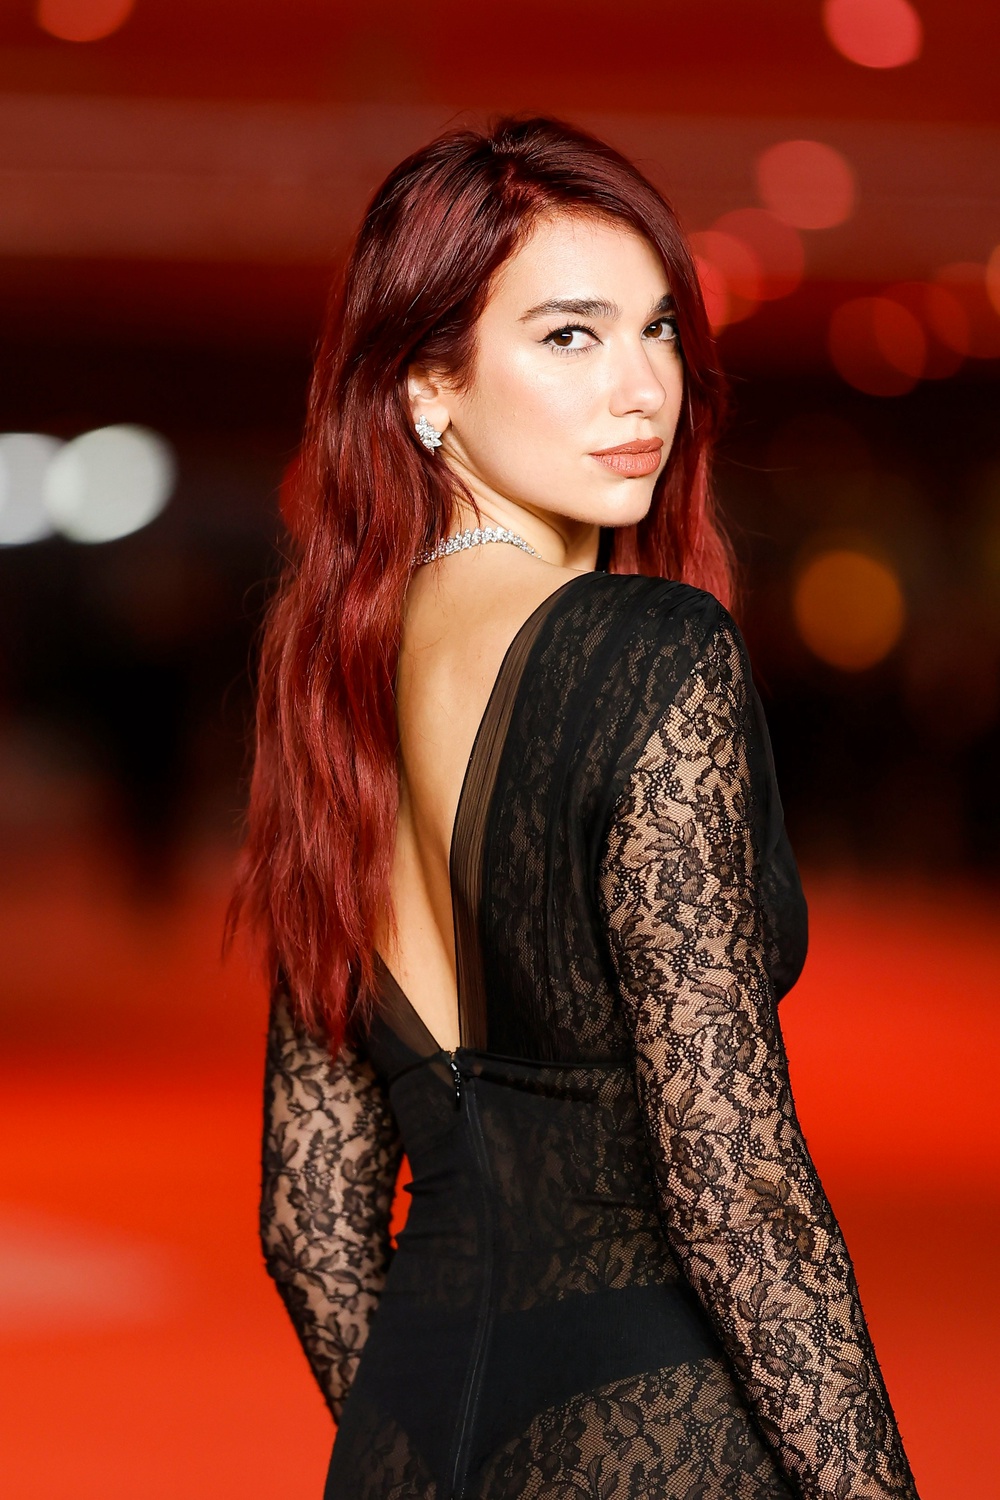 Dua Lipa Flaunted Her Thong Freed The Nipple In A Lacy Lbd